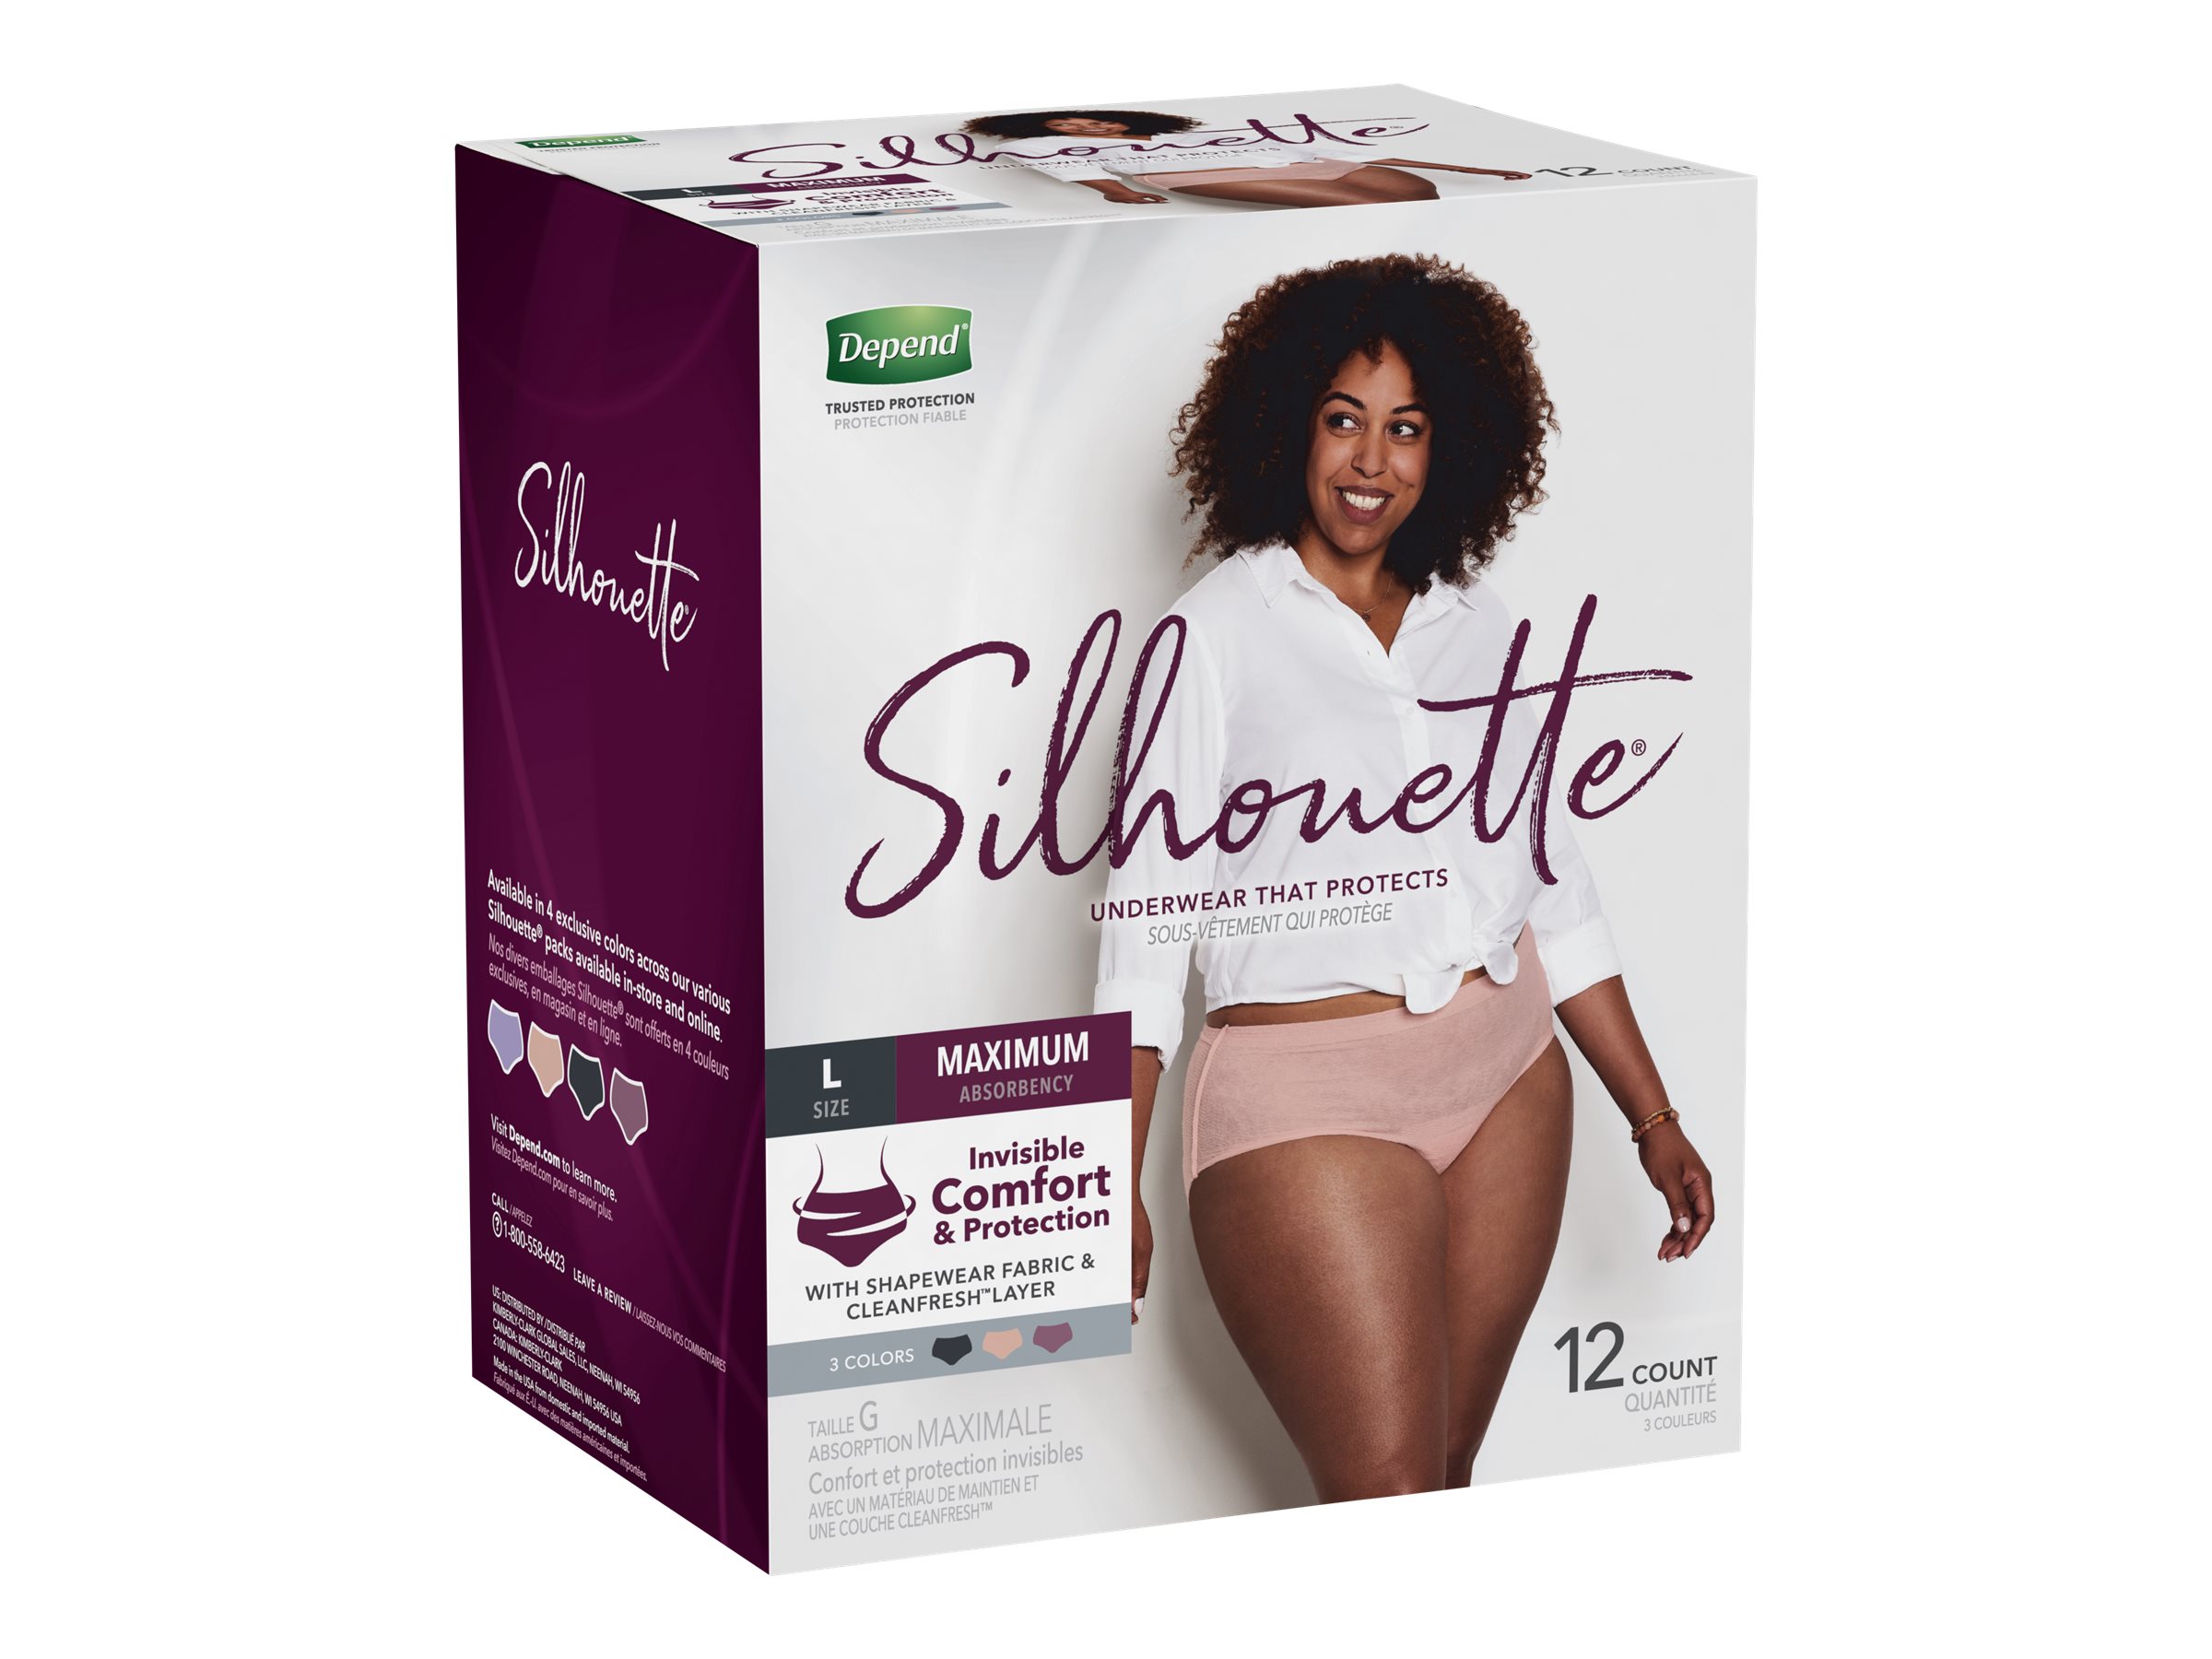 Buy Depend Real Fit Underwear Female X Large 8 Online at Chemist Warehouse®